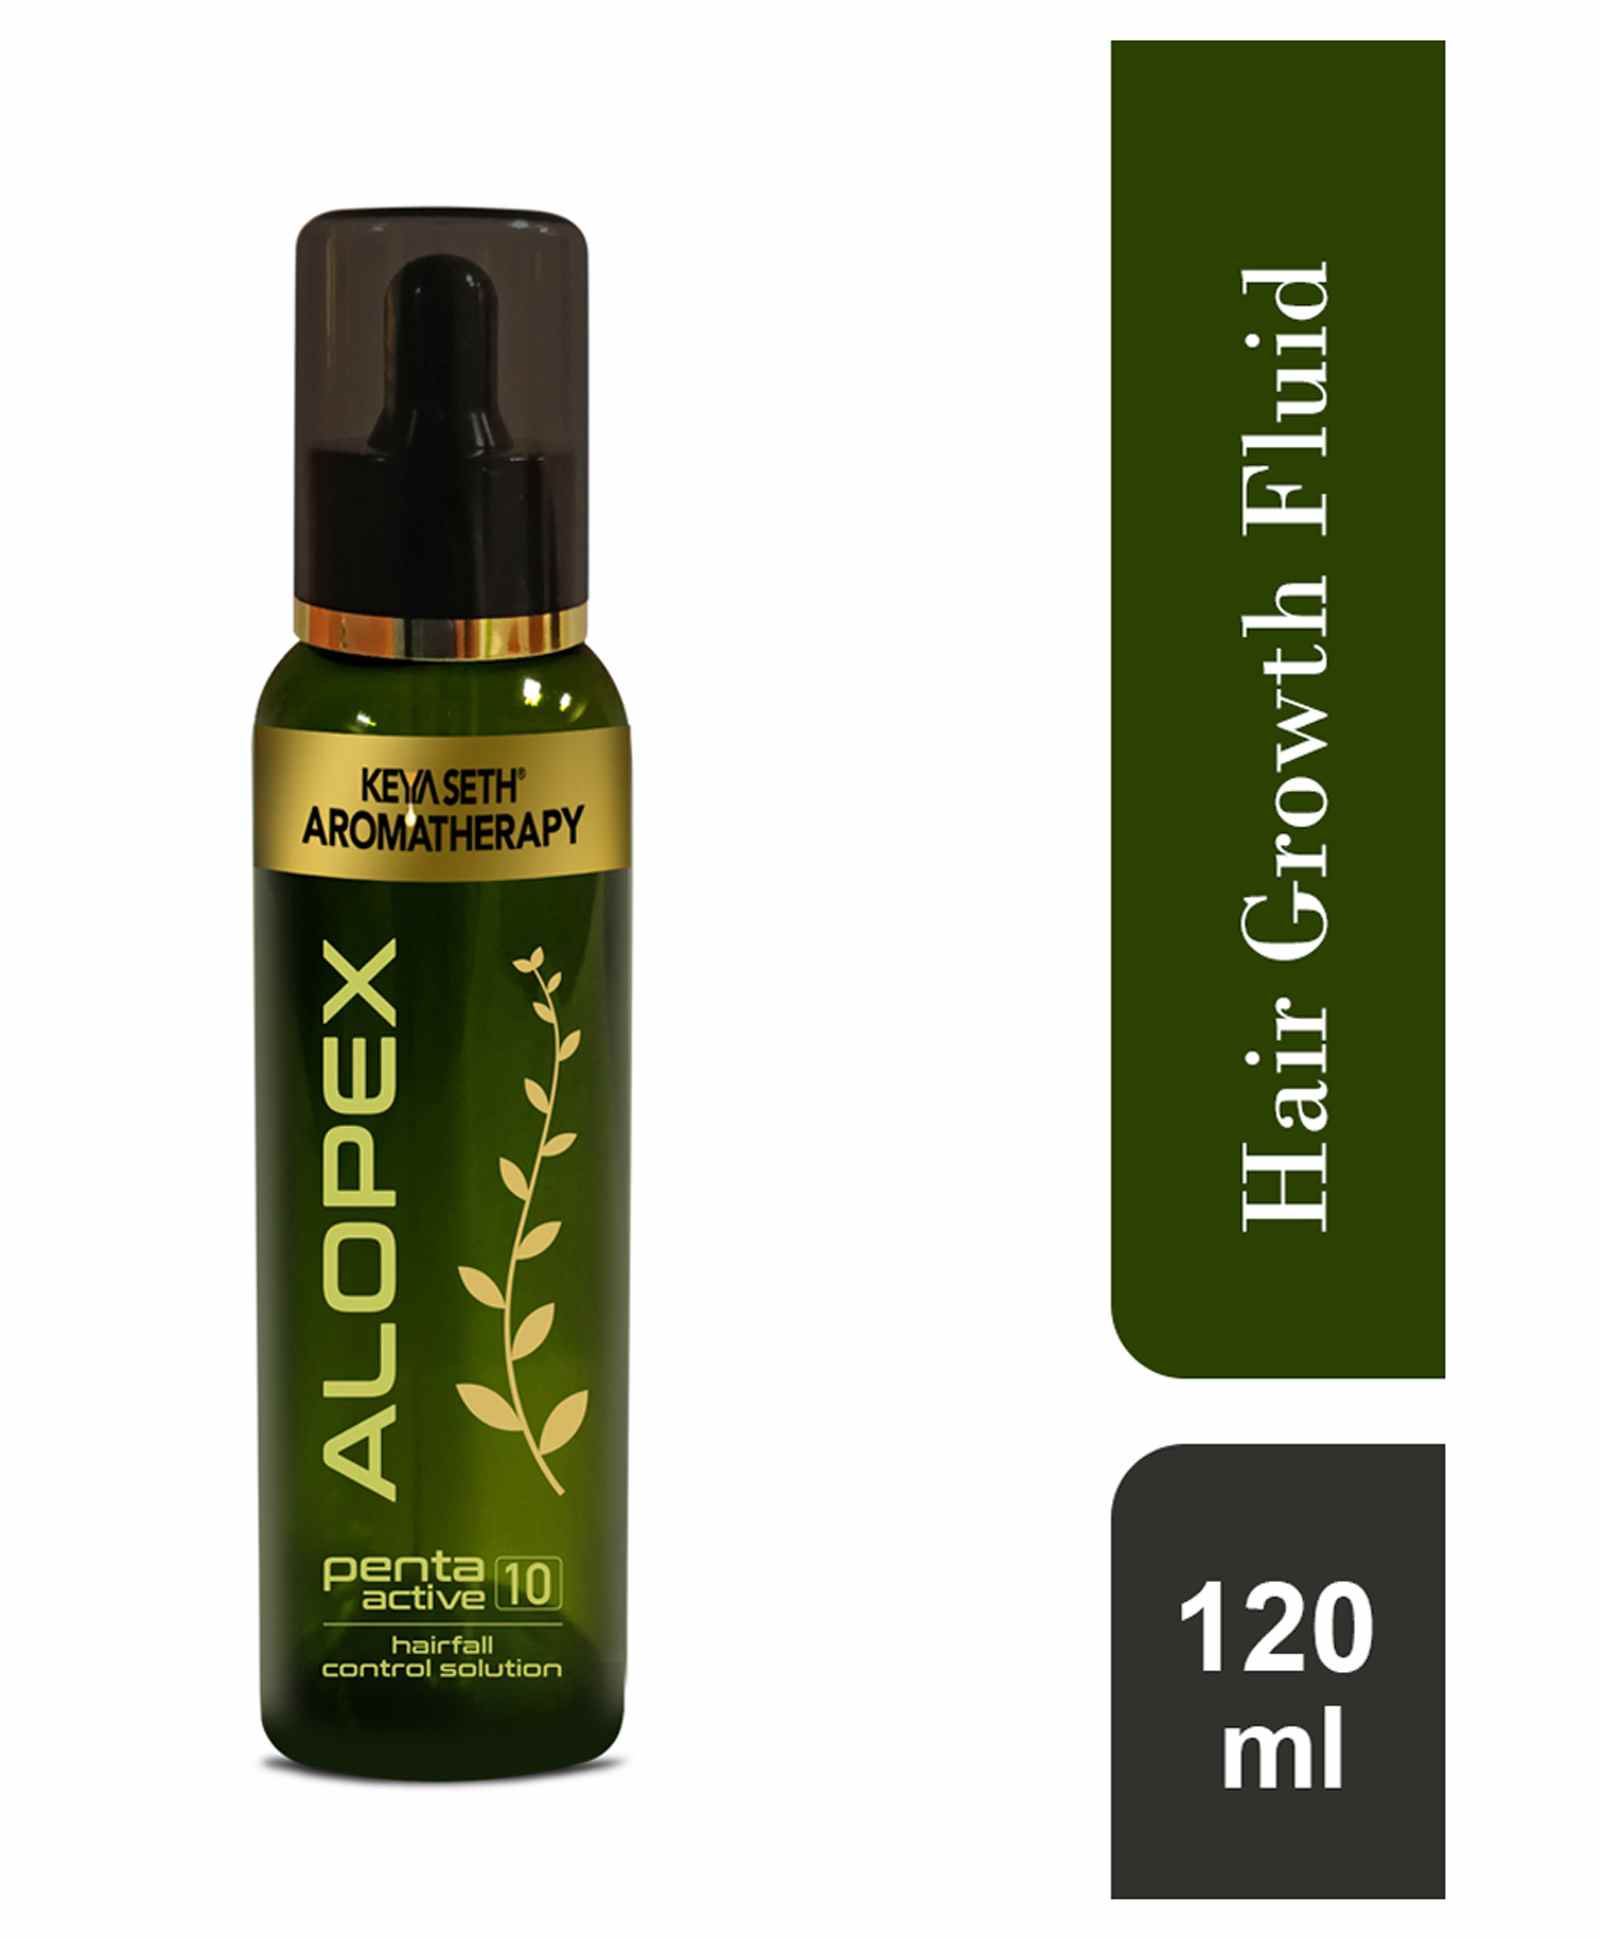 Keya Seth Aromatherapy, Alopex Penta Active 10 for Hairfall Control  Solution - 120 ml each Online in India, Buy at Best Price from   - 9276975